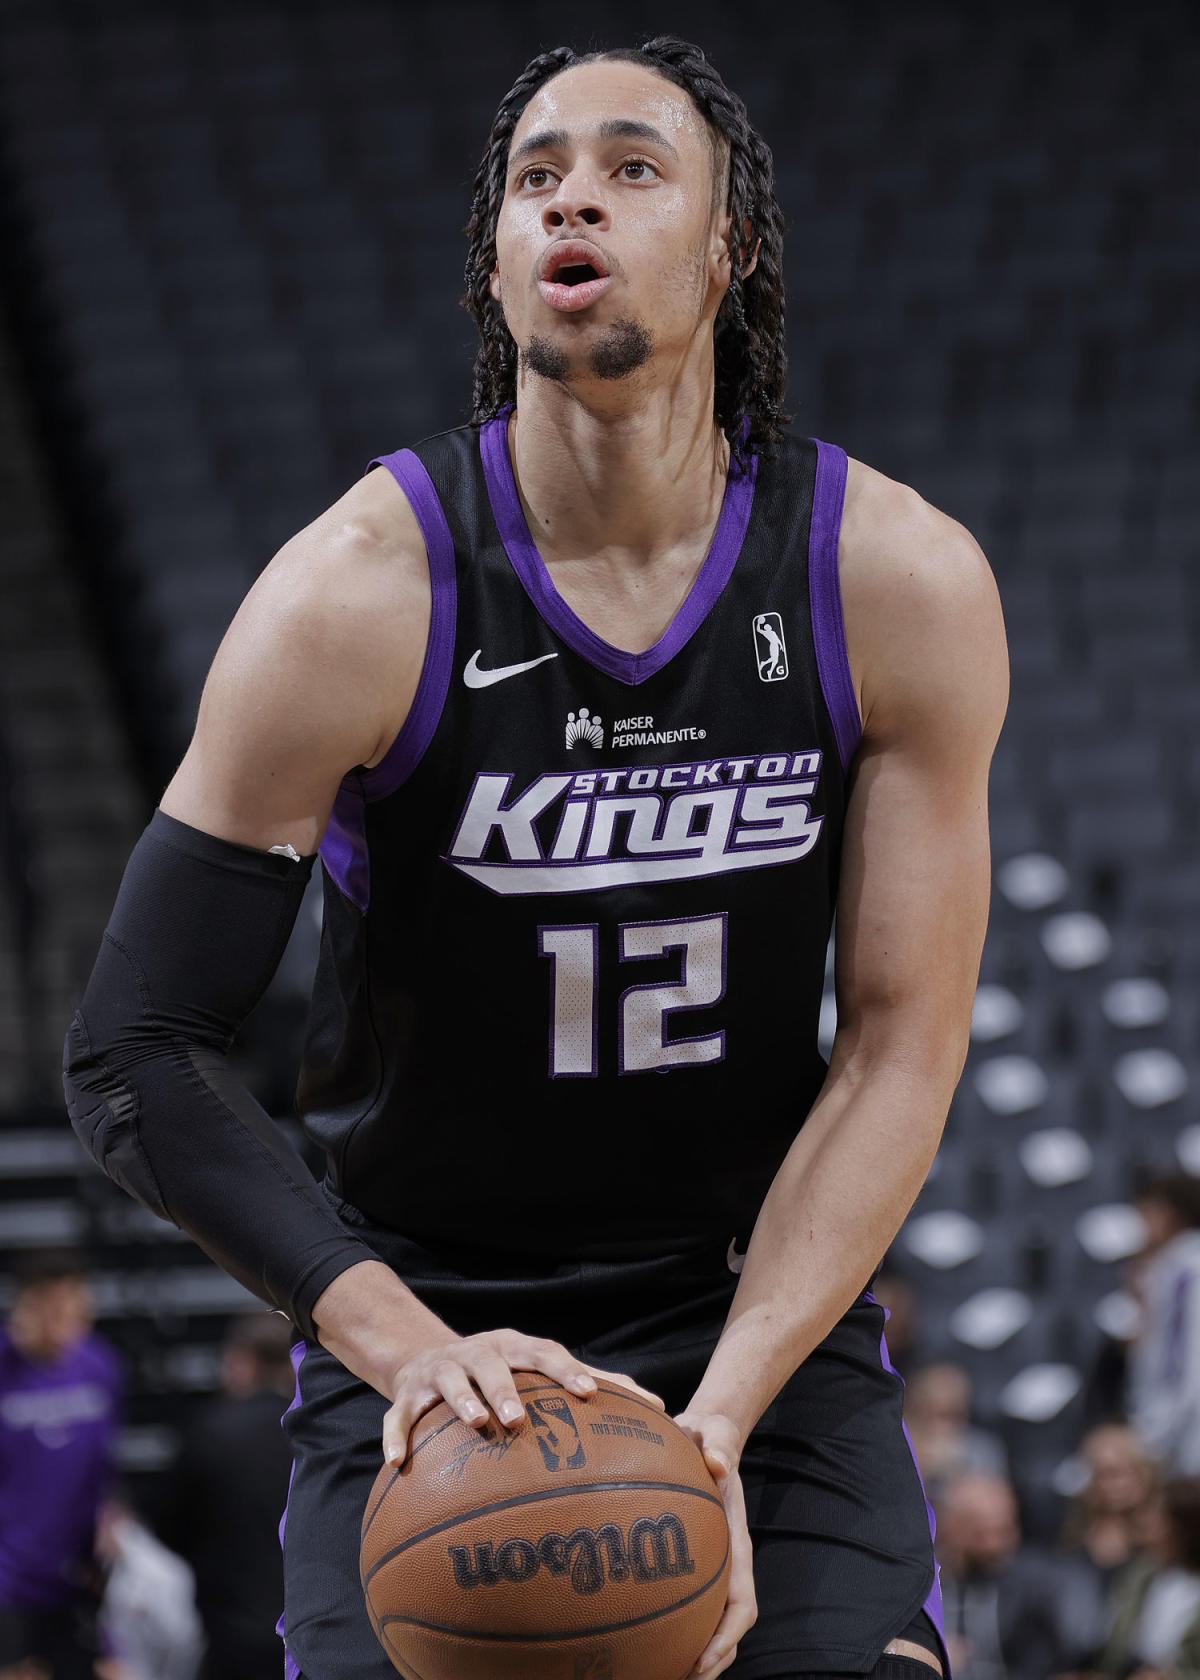 #Sacramento Kings G League player and girlfriend accused of murdering friend in Las Vegas